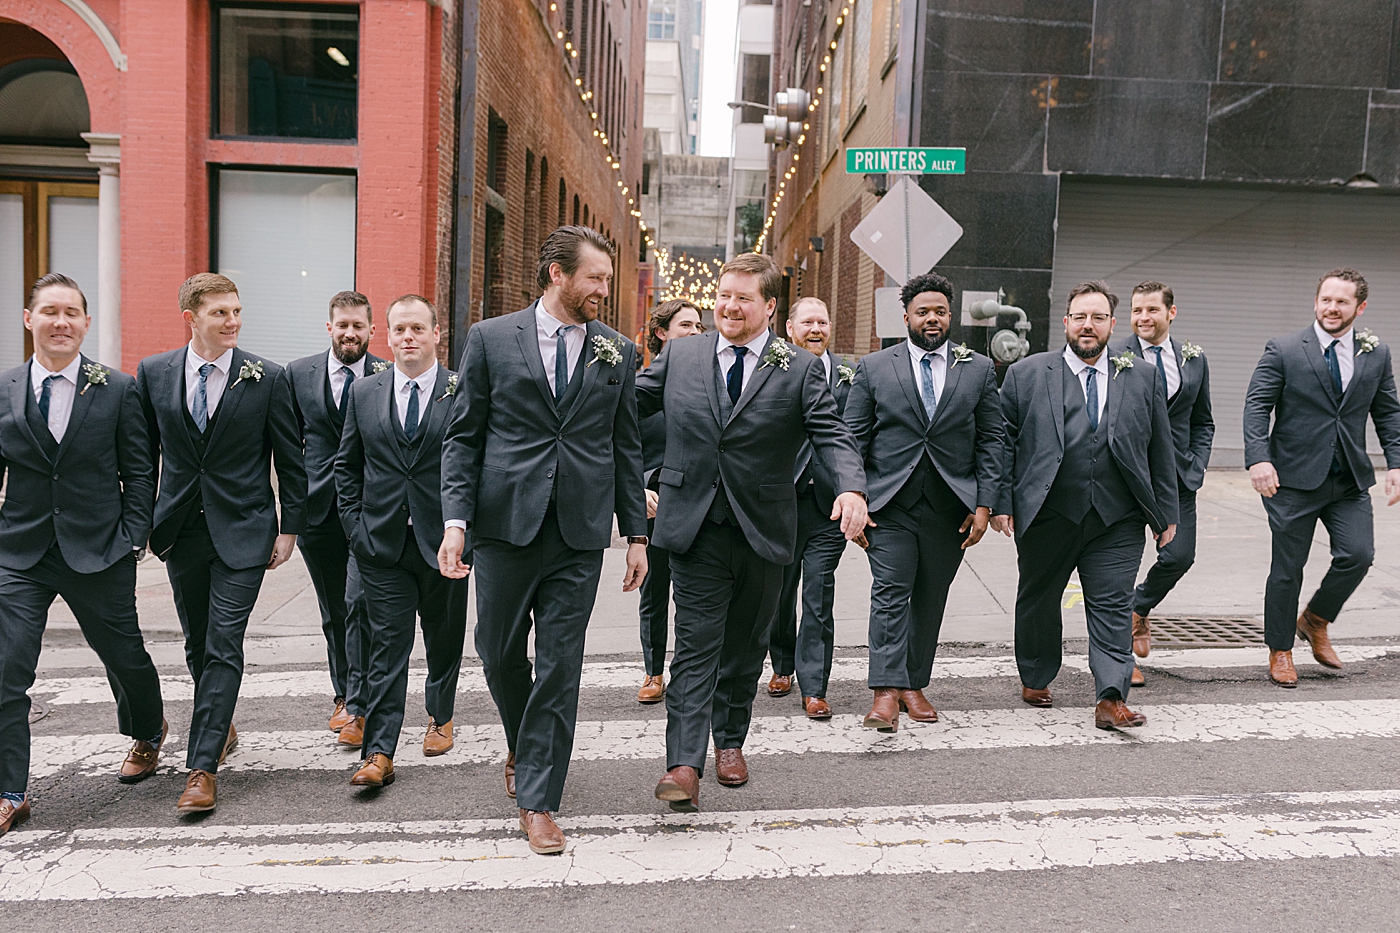 Groomsmen walking near Printers Alley | Photo by Hope Helmuth Photography